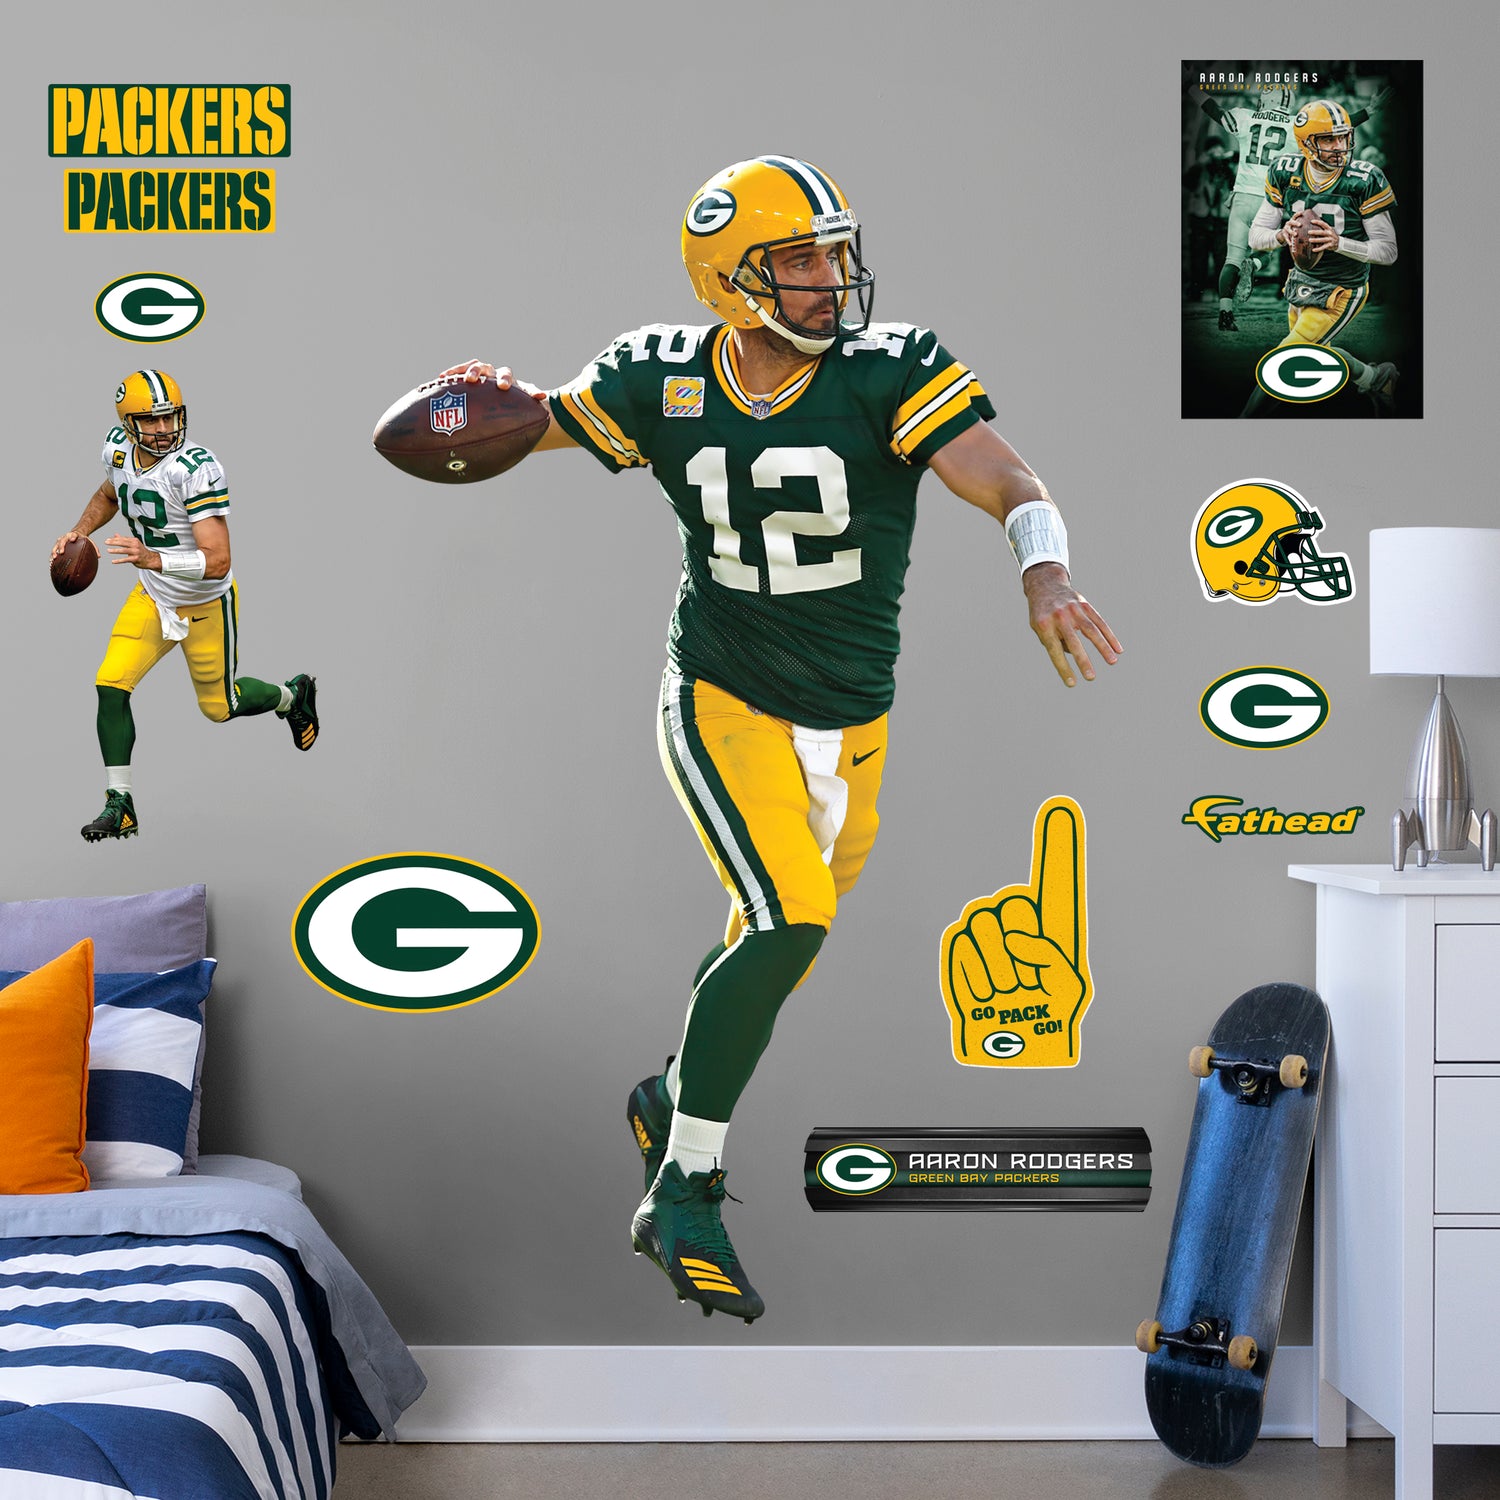 Aaron Rodgers Cutouts & Wall Decals